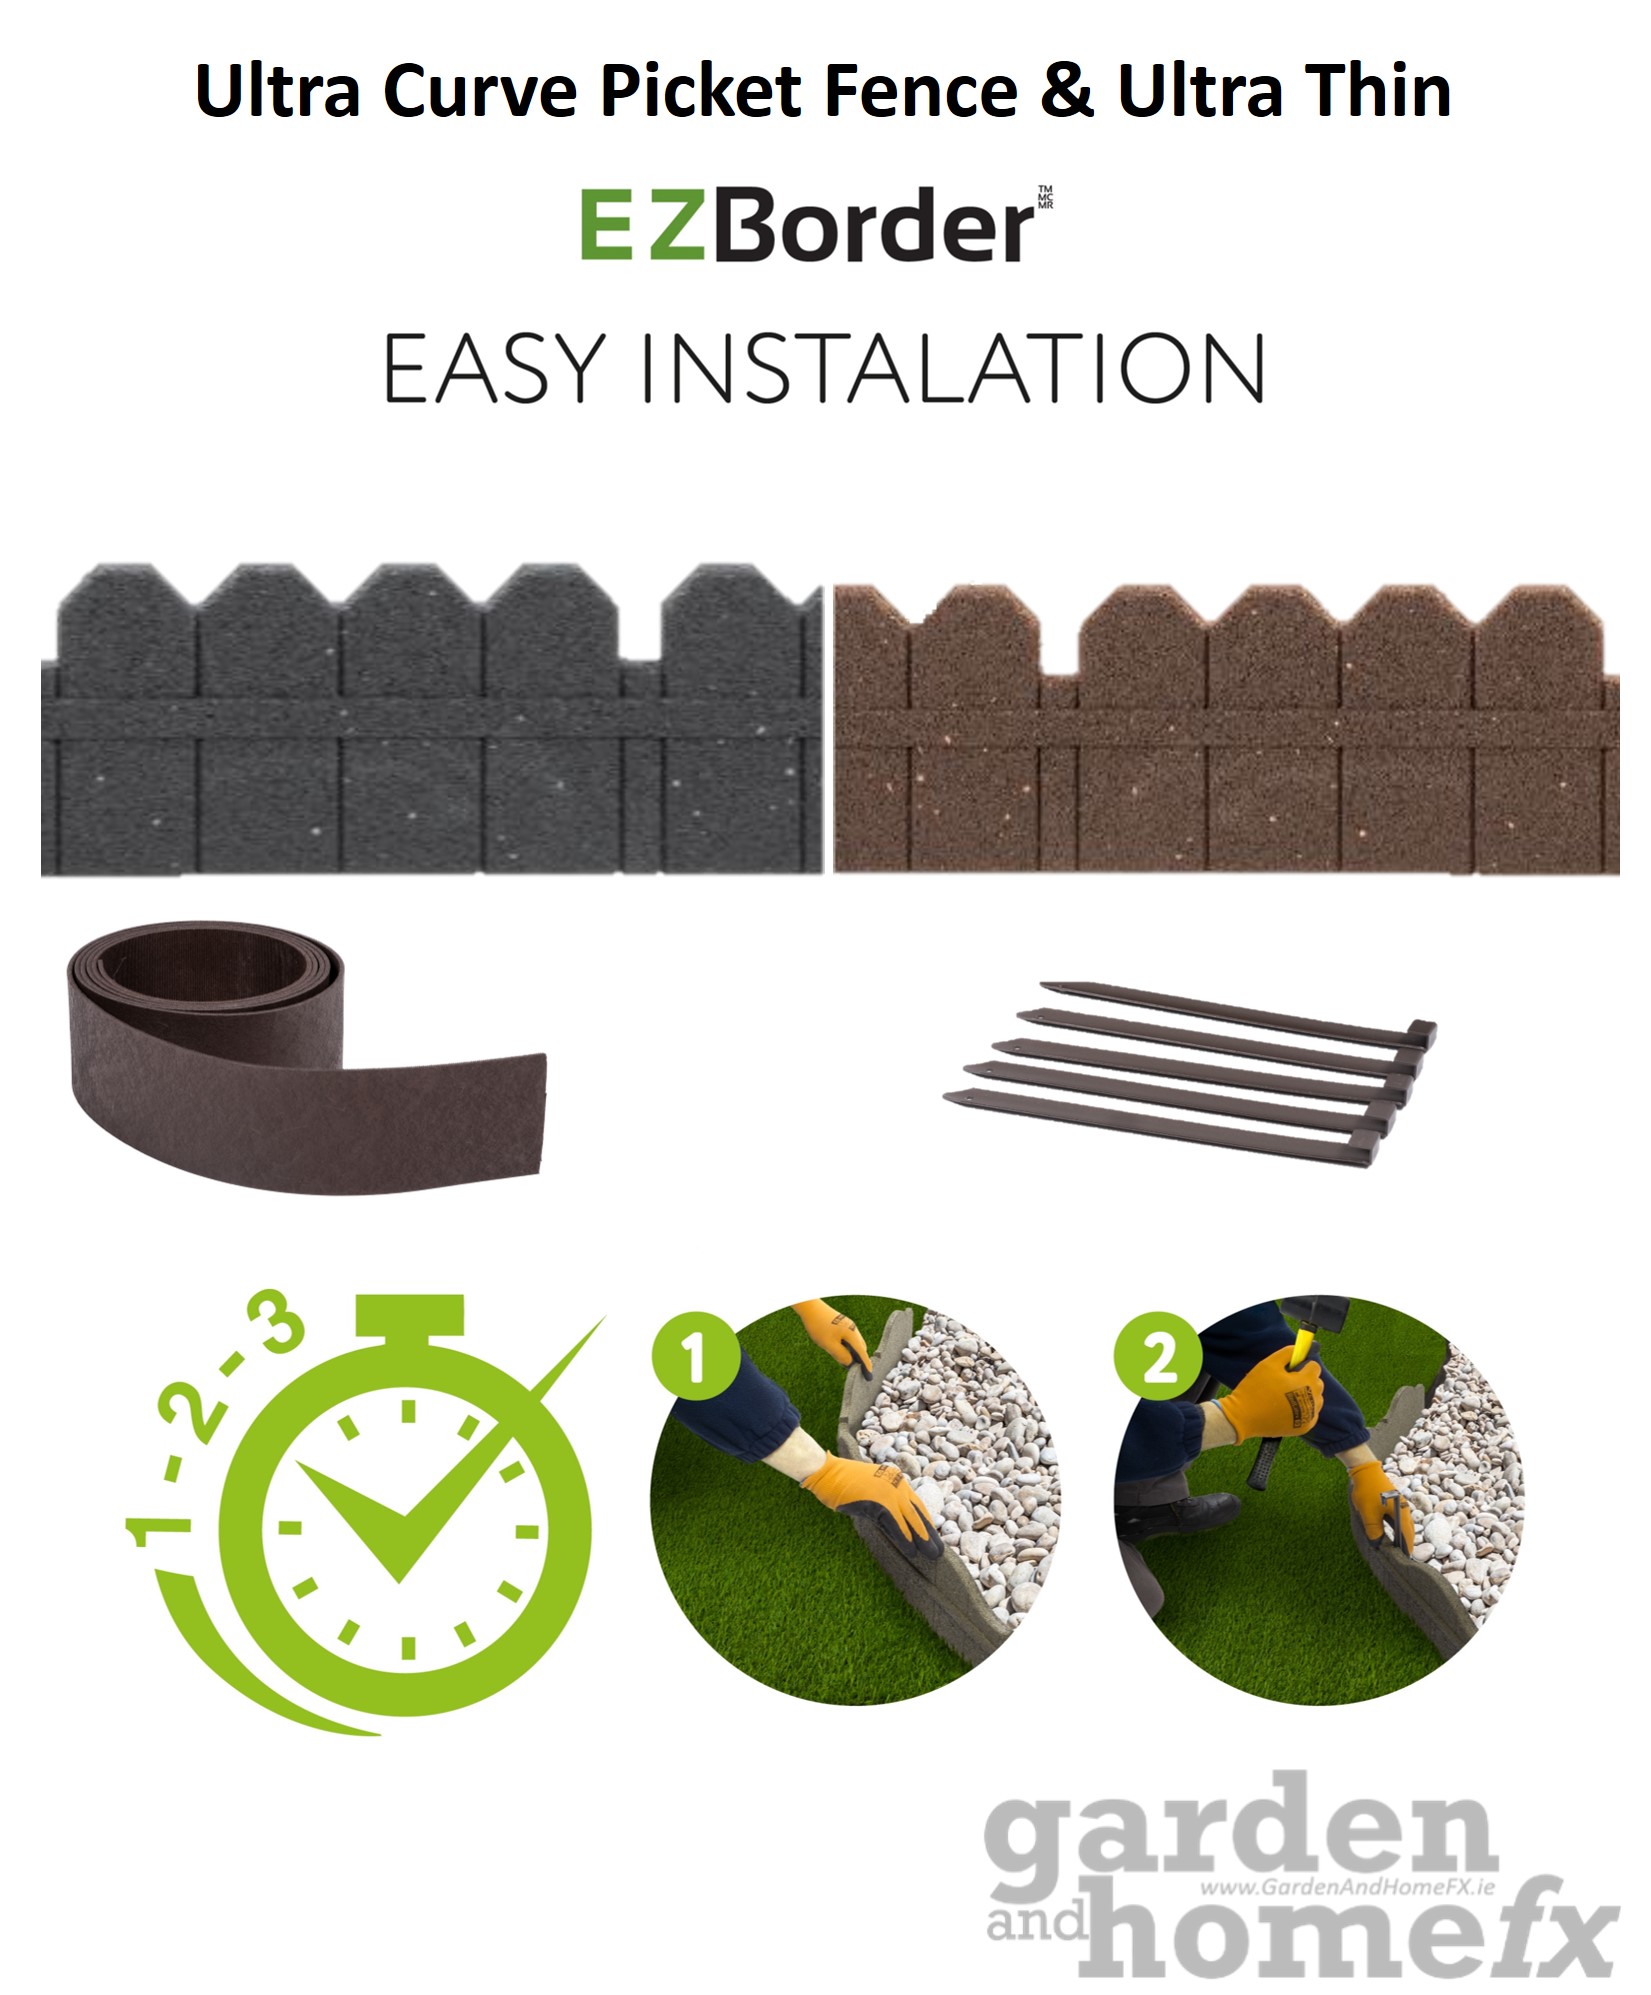 Ultra Curve Garden Lawn Edgeing is made from Recycled Rubber Car Tyres, Supplied in Ireland Instalation Guide